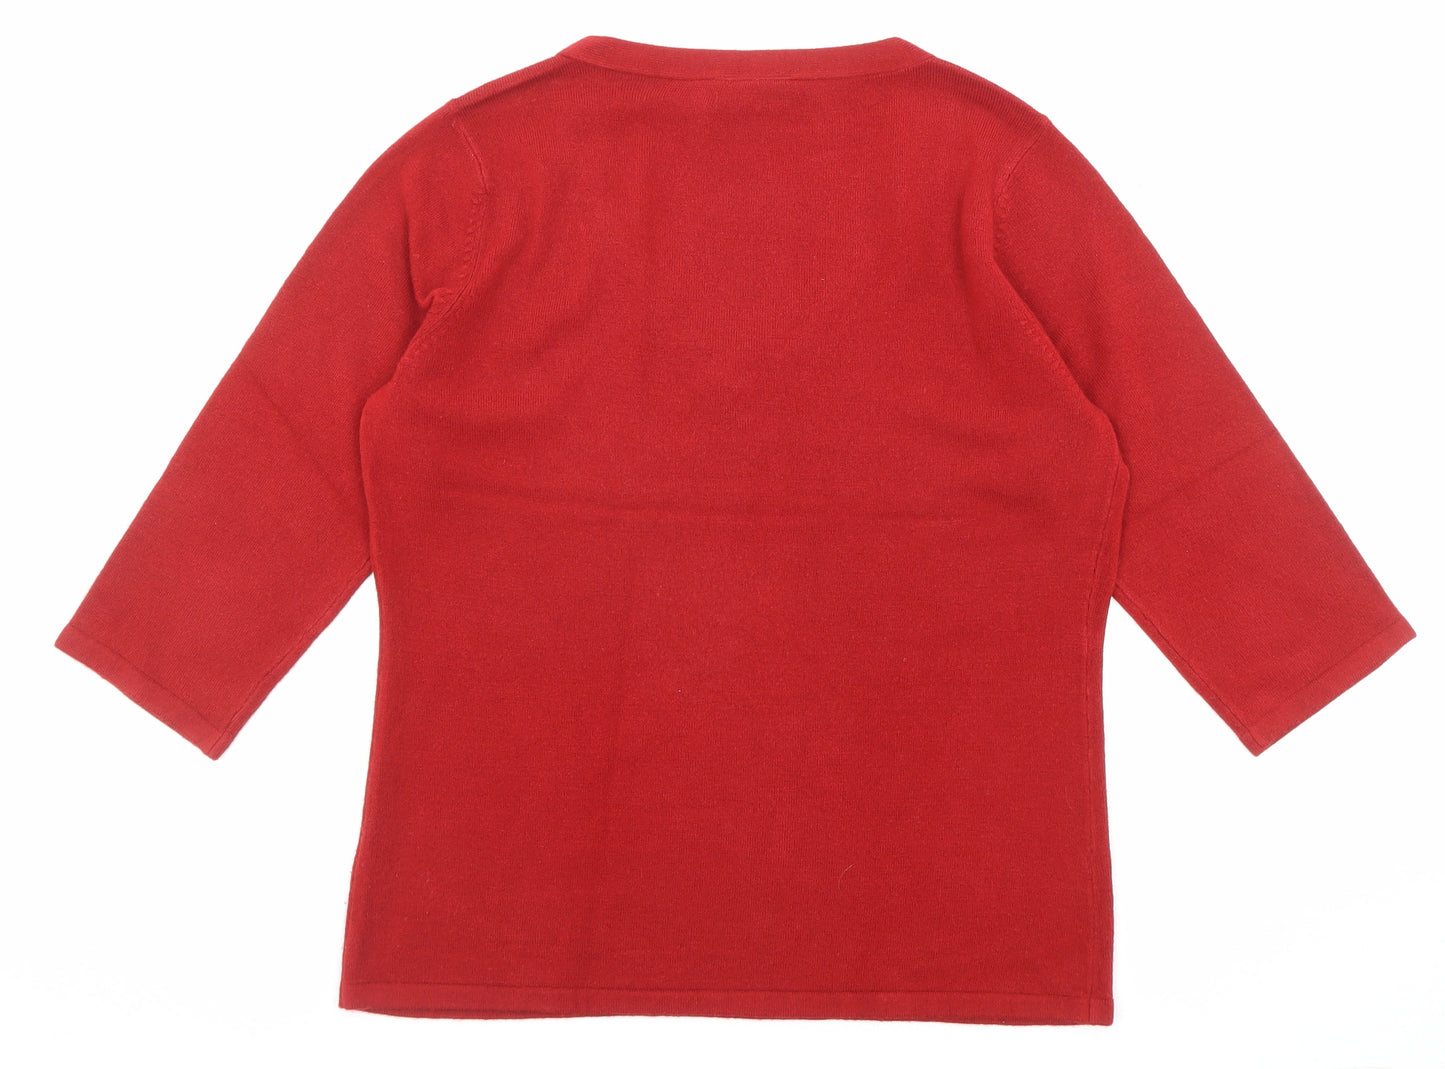 BHS Womens Red V-Neck Acrylic Pullover Jumper Size 14